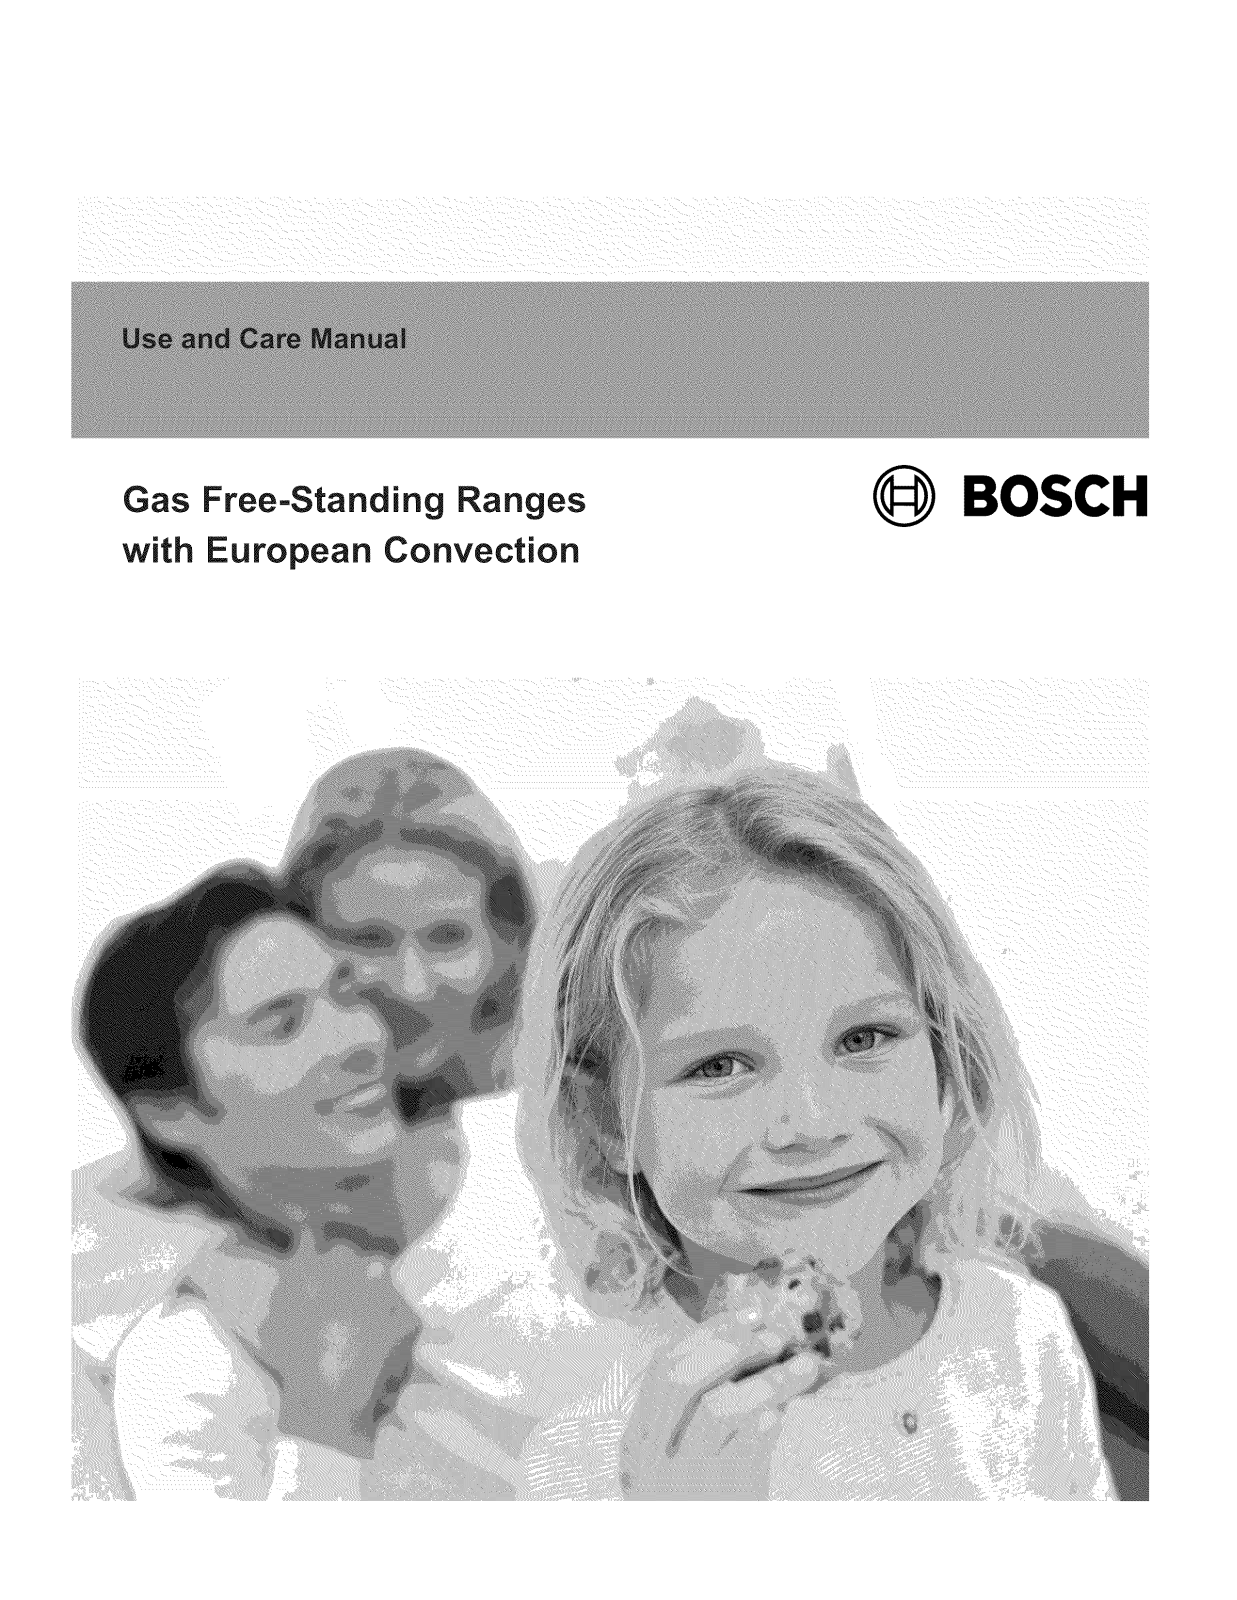 Bosch HGS7282UC/05, HGS7132UC/04, HGS7052UC/04 Owner’s Manual